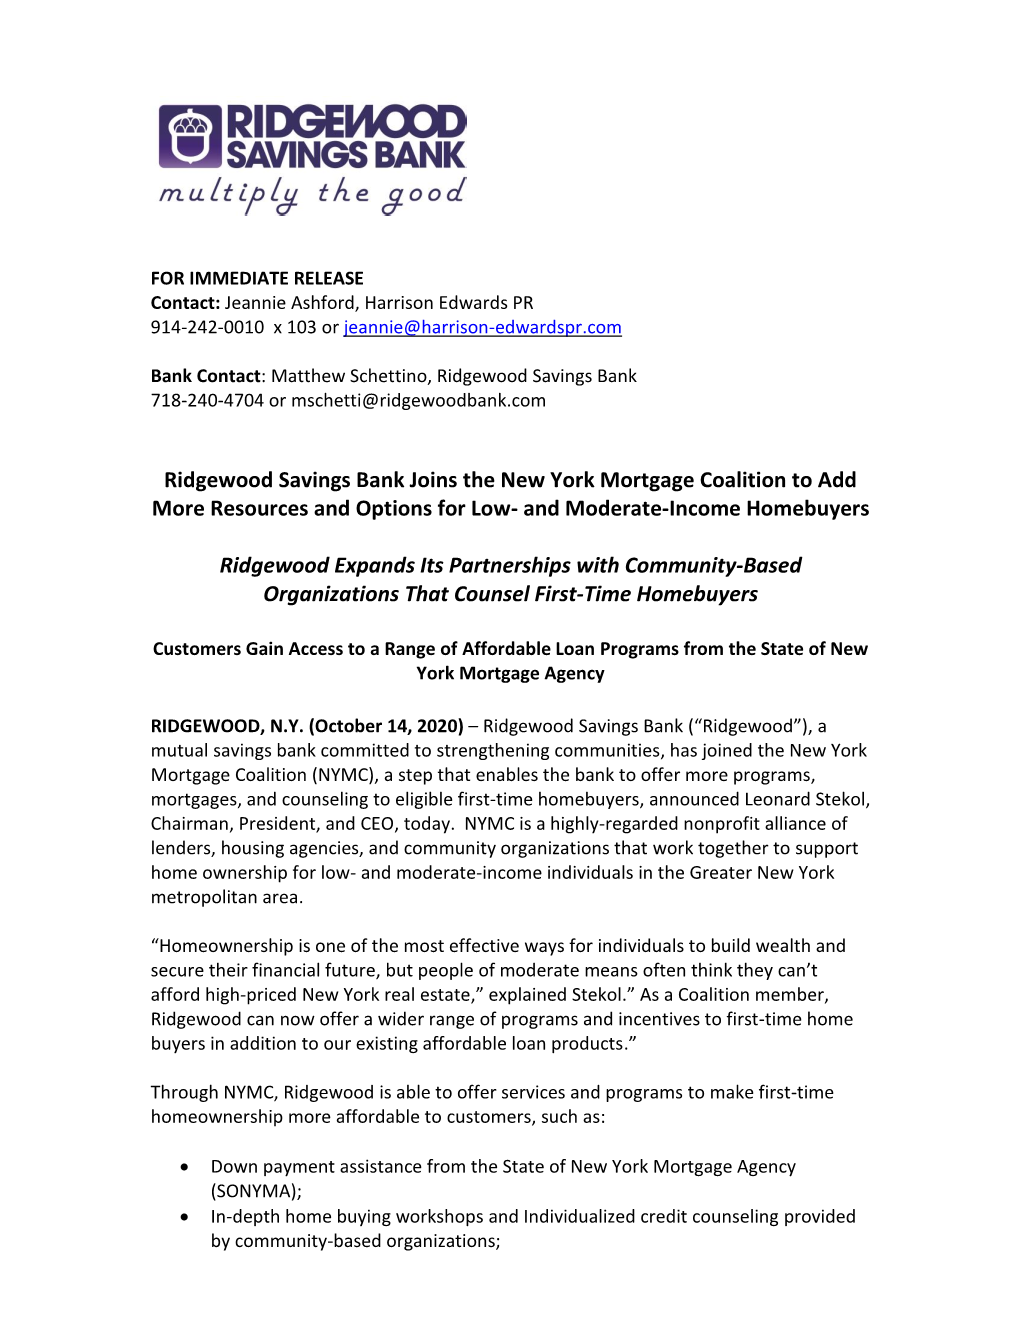 Ridgewood Savings Bank Joins the New York Mortgage Coalition to Add More Resources and Options for Low- and Moderate-Income Homebuyers